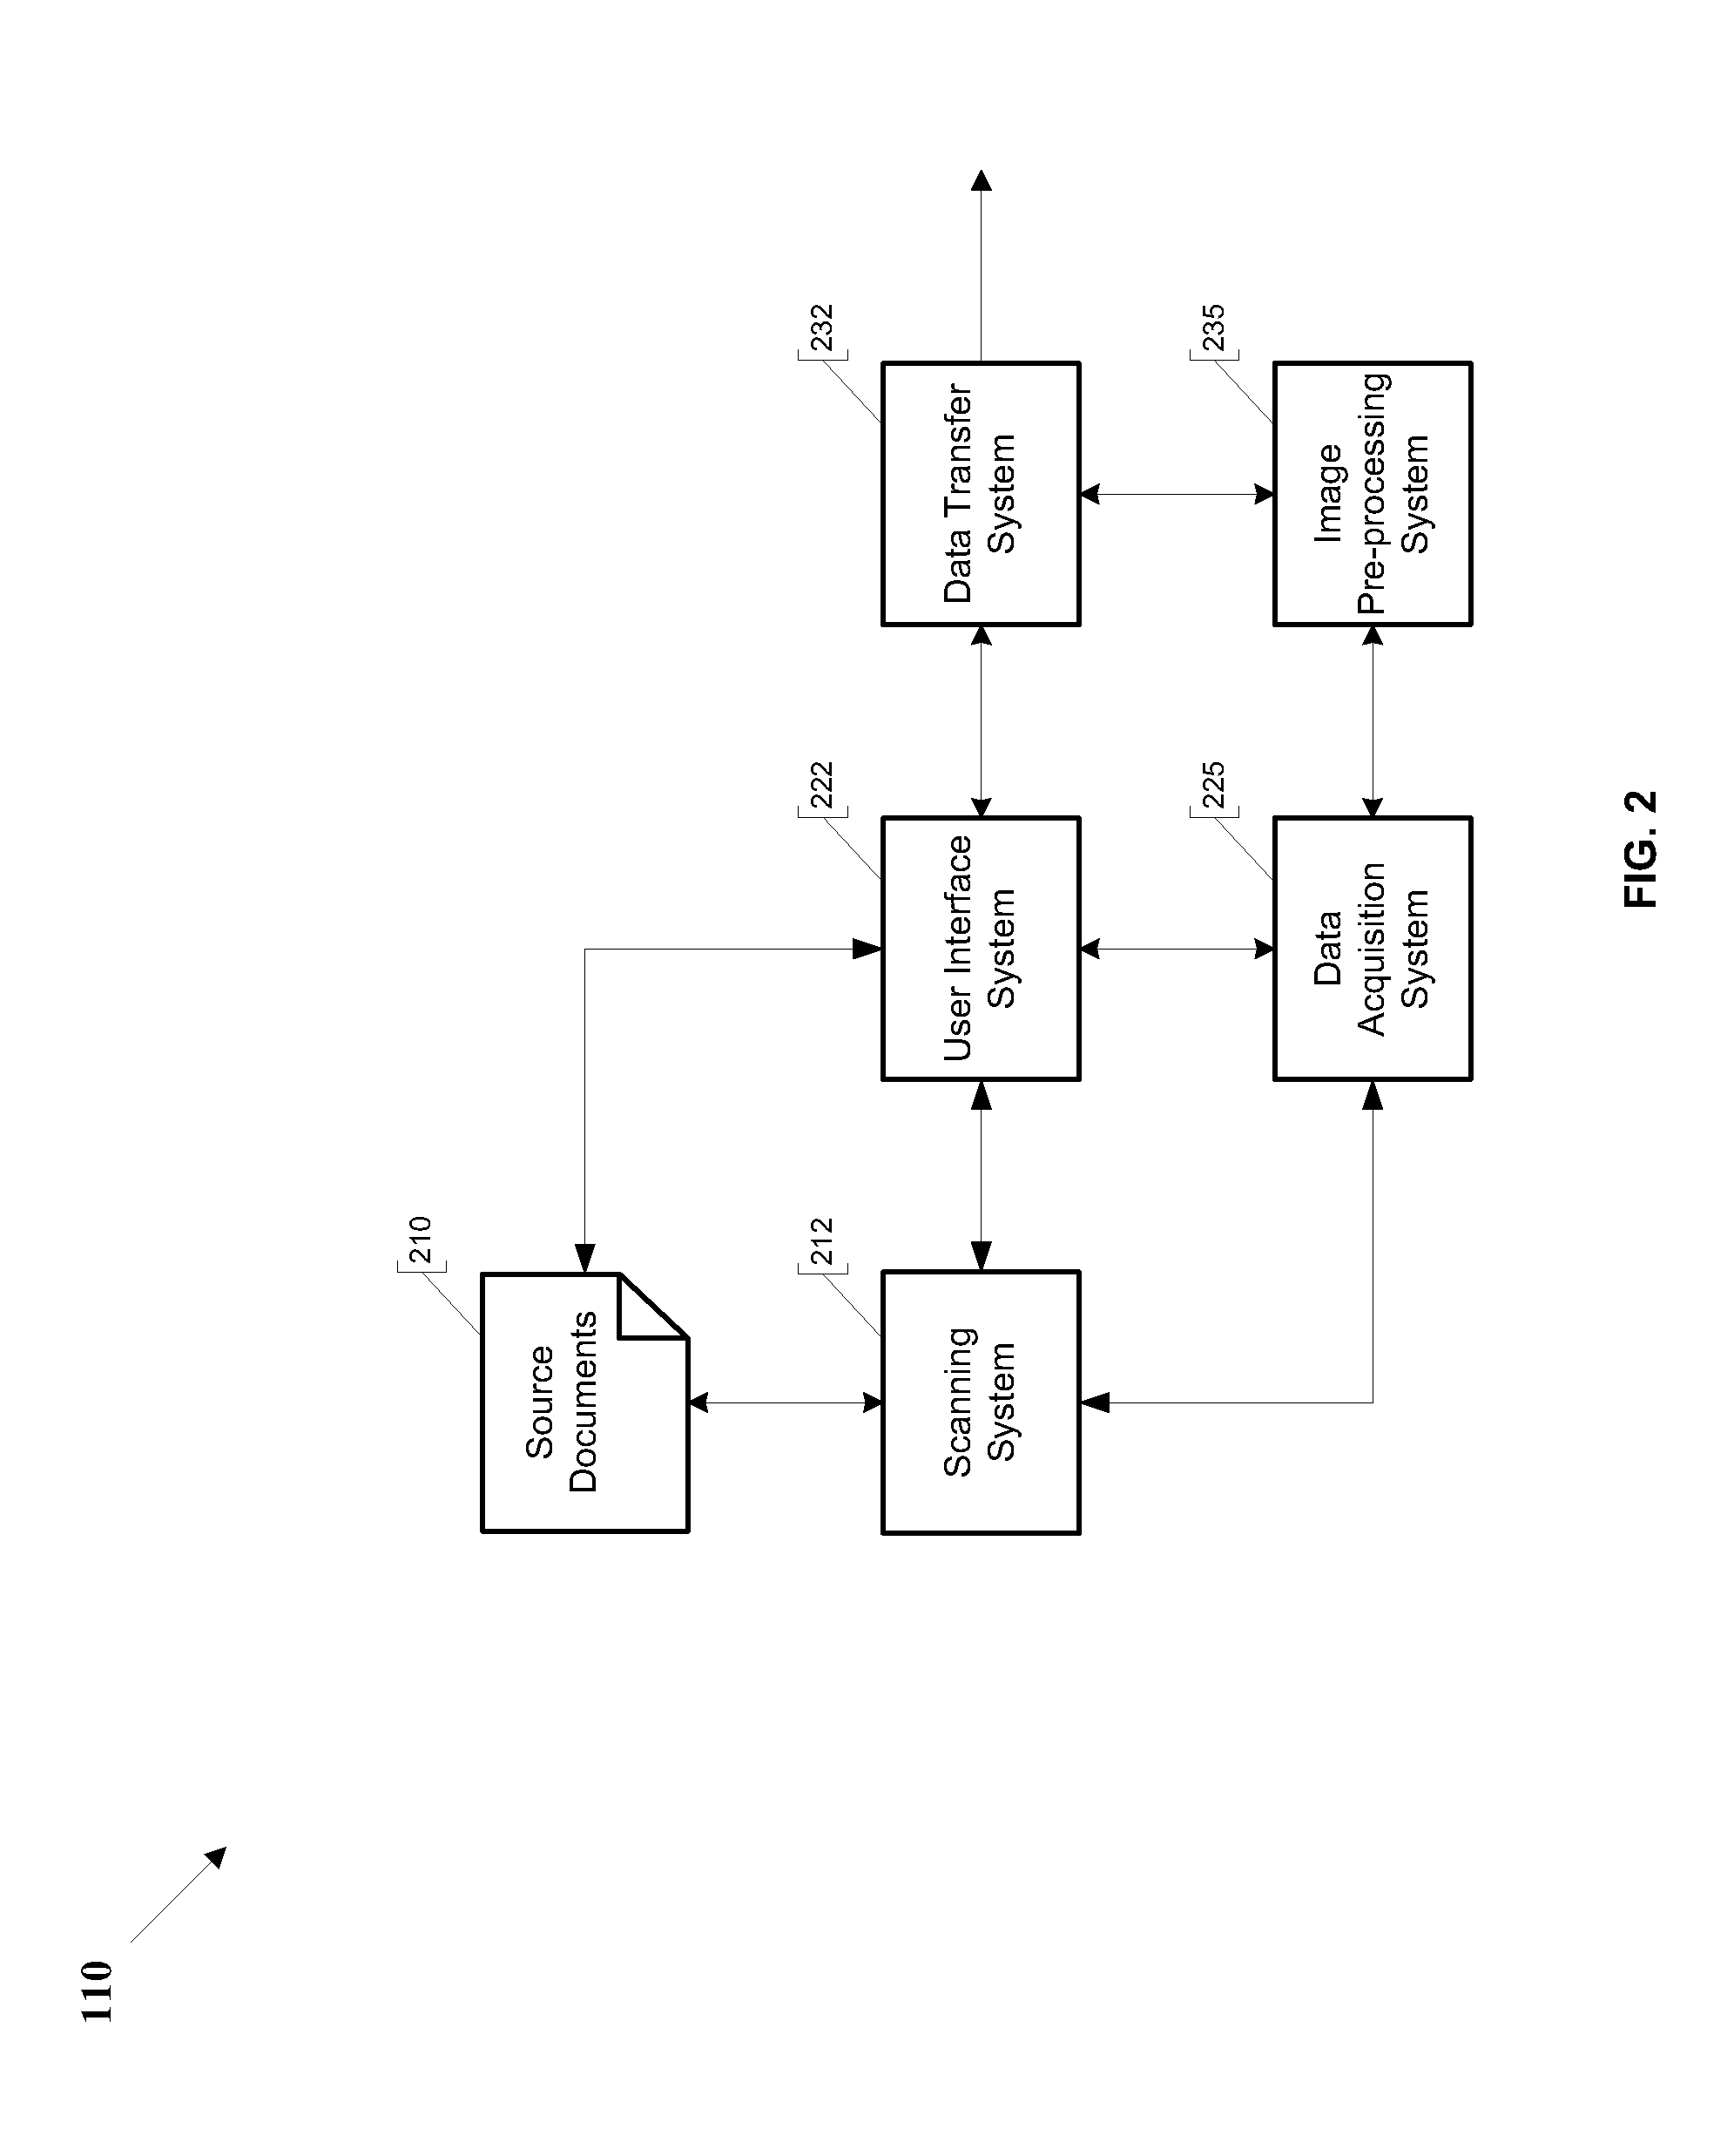 Systems and methods for automatically extracting data from electronic documents including tables